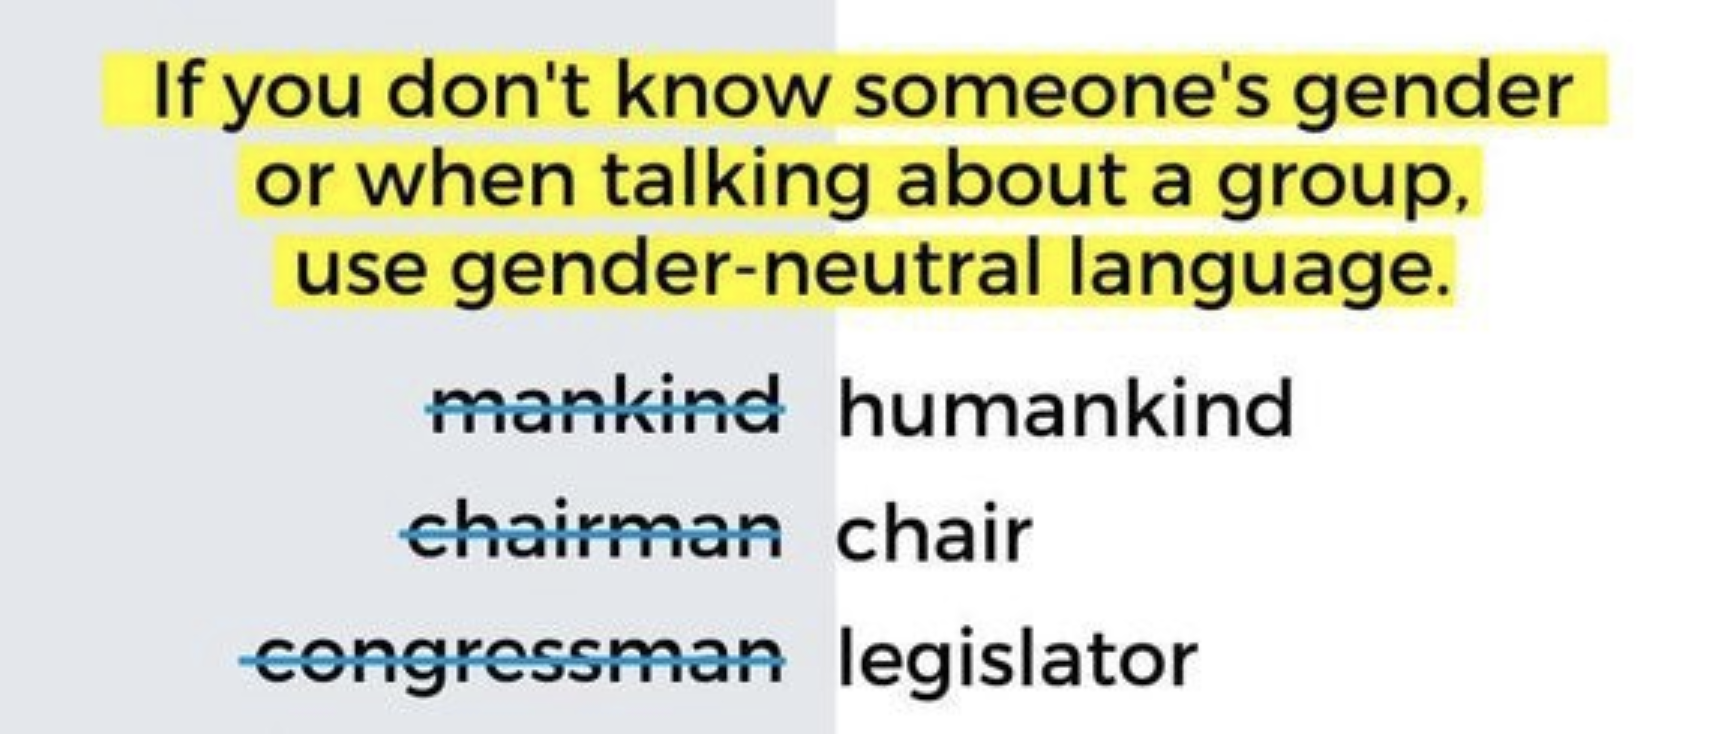 If you don't know someone's gender or when talking about a group use gender-neutral language.